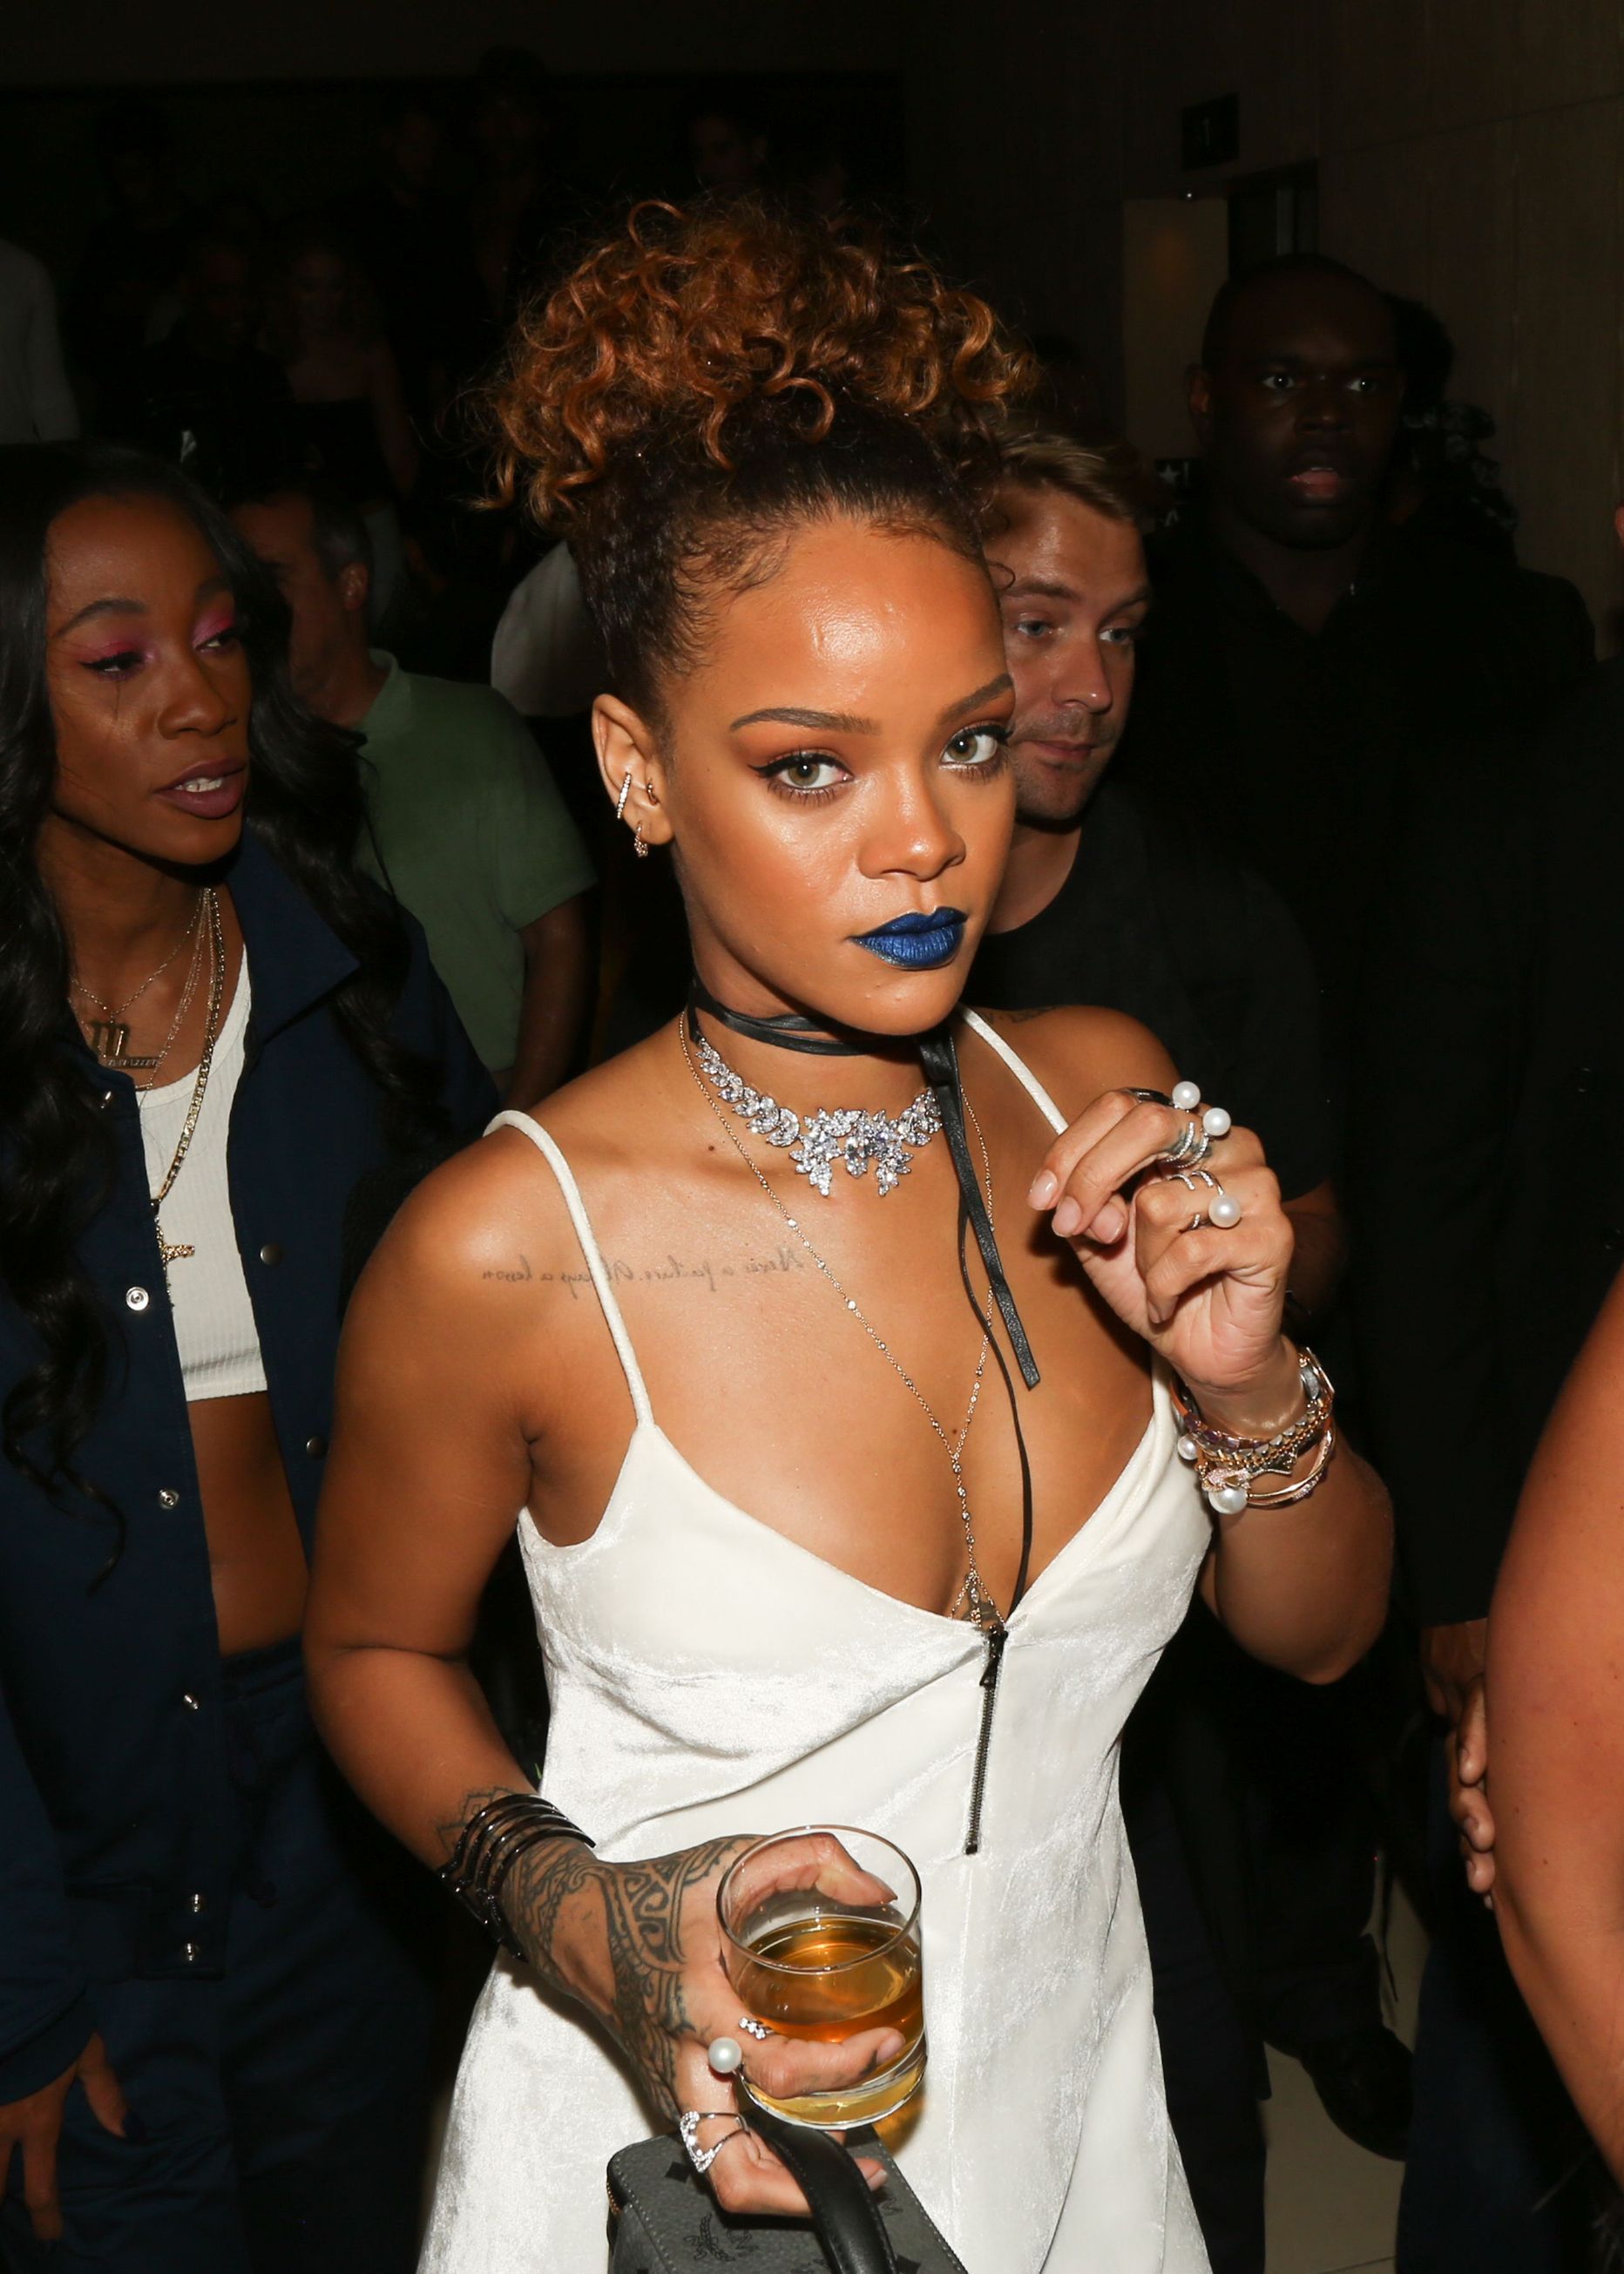 Rihanna - 9/10/2015 - New York, New York - RIHANNA PARTY AT THE NEW YORK EDITION held at The New York EDITION, NYC. (Photo by Emanuele D'Angelo/BFA) *** Please Use Credit from Credit Field ***